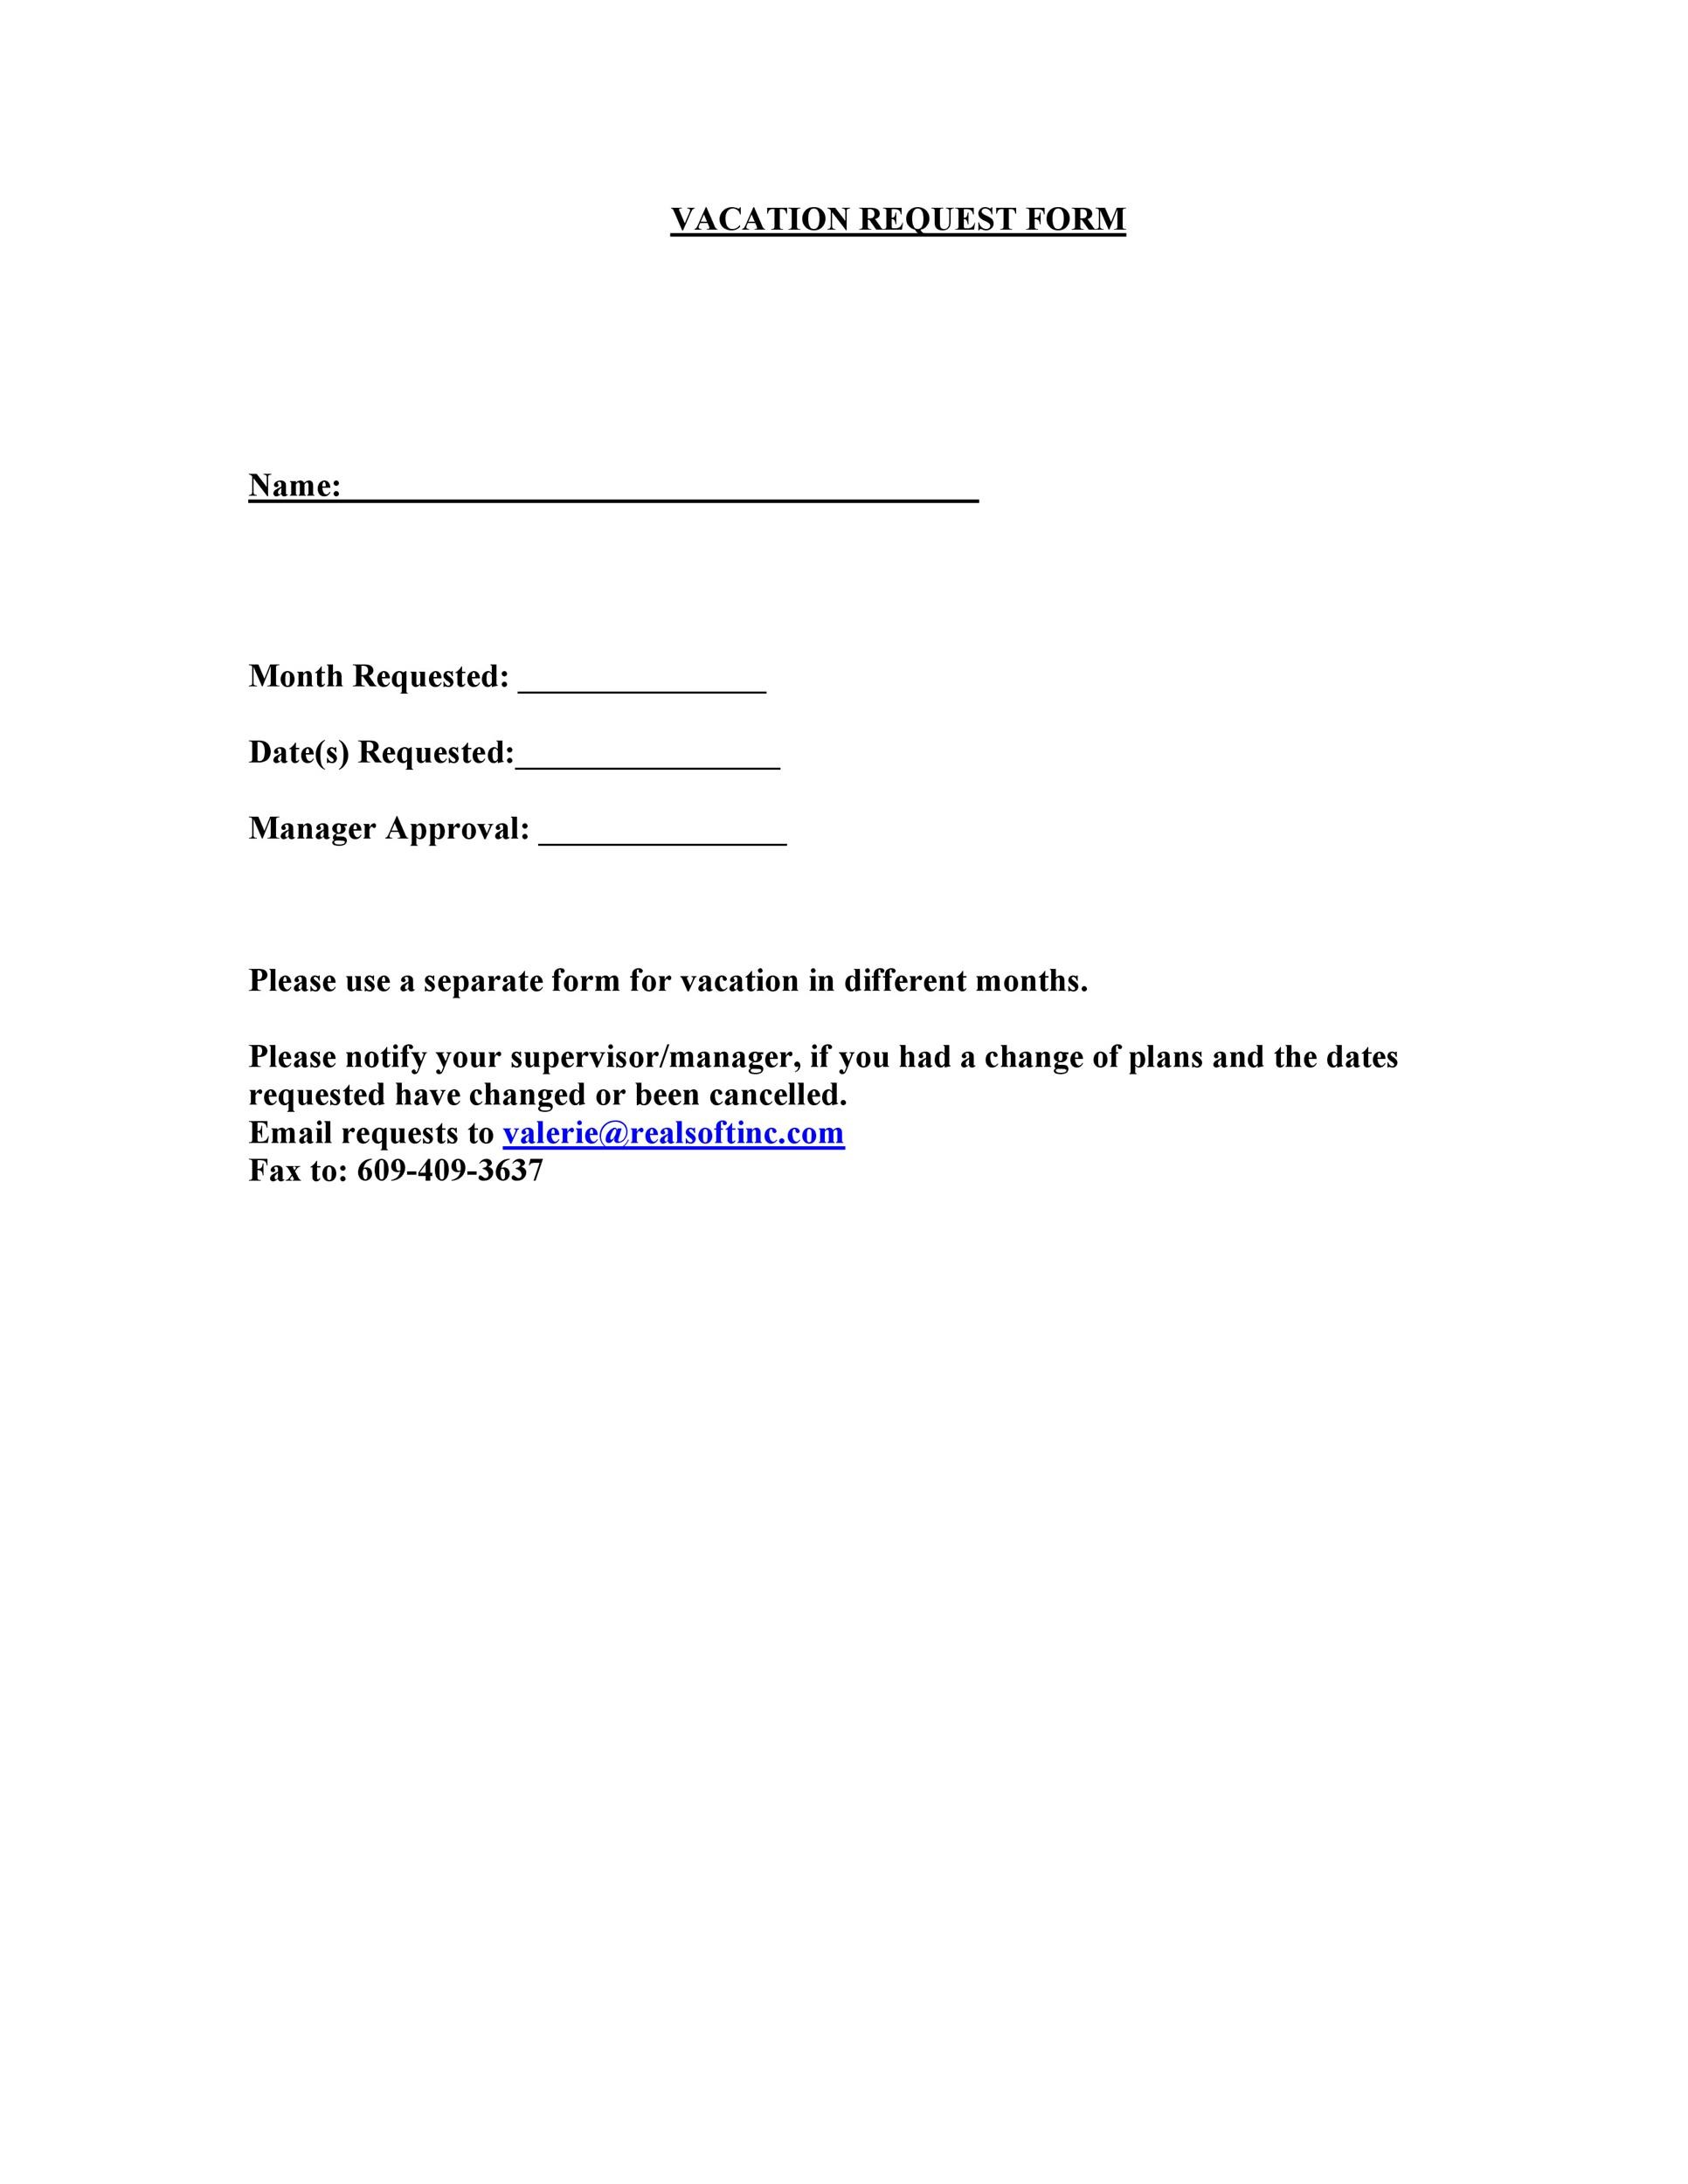 Free vacation request form 22